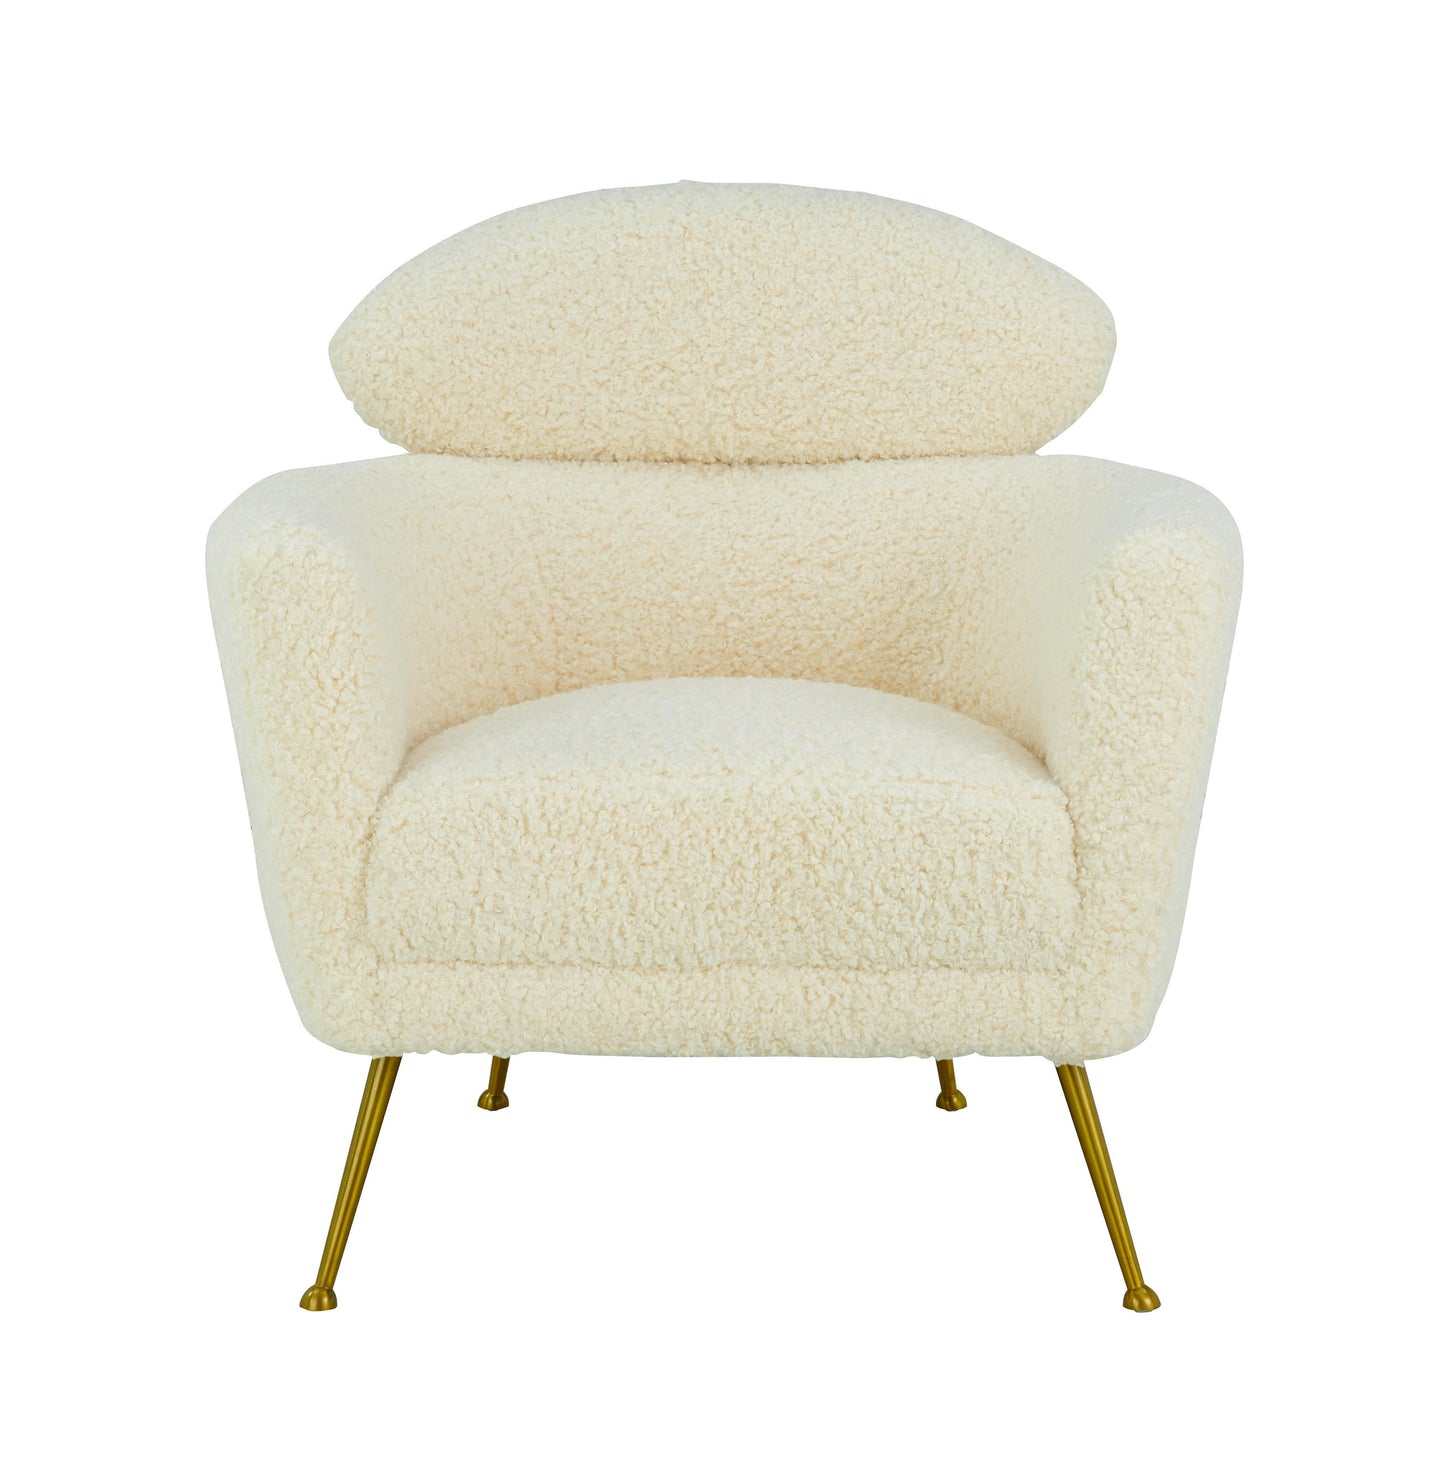 Tov Furniture Welsh Faux Shearling Chair